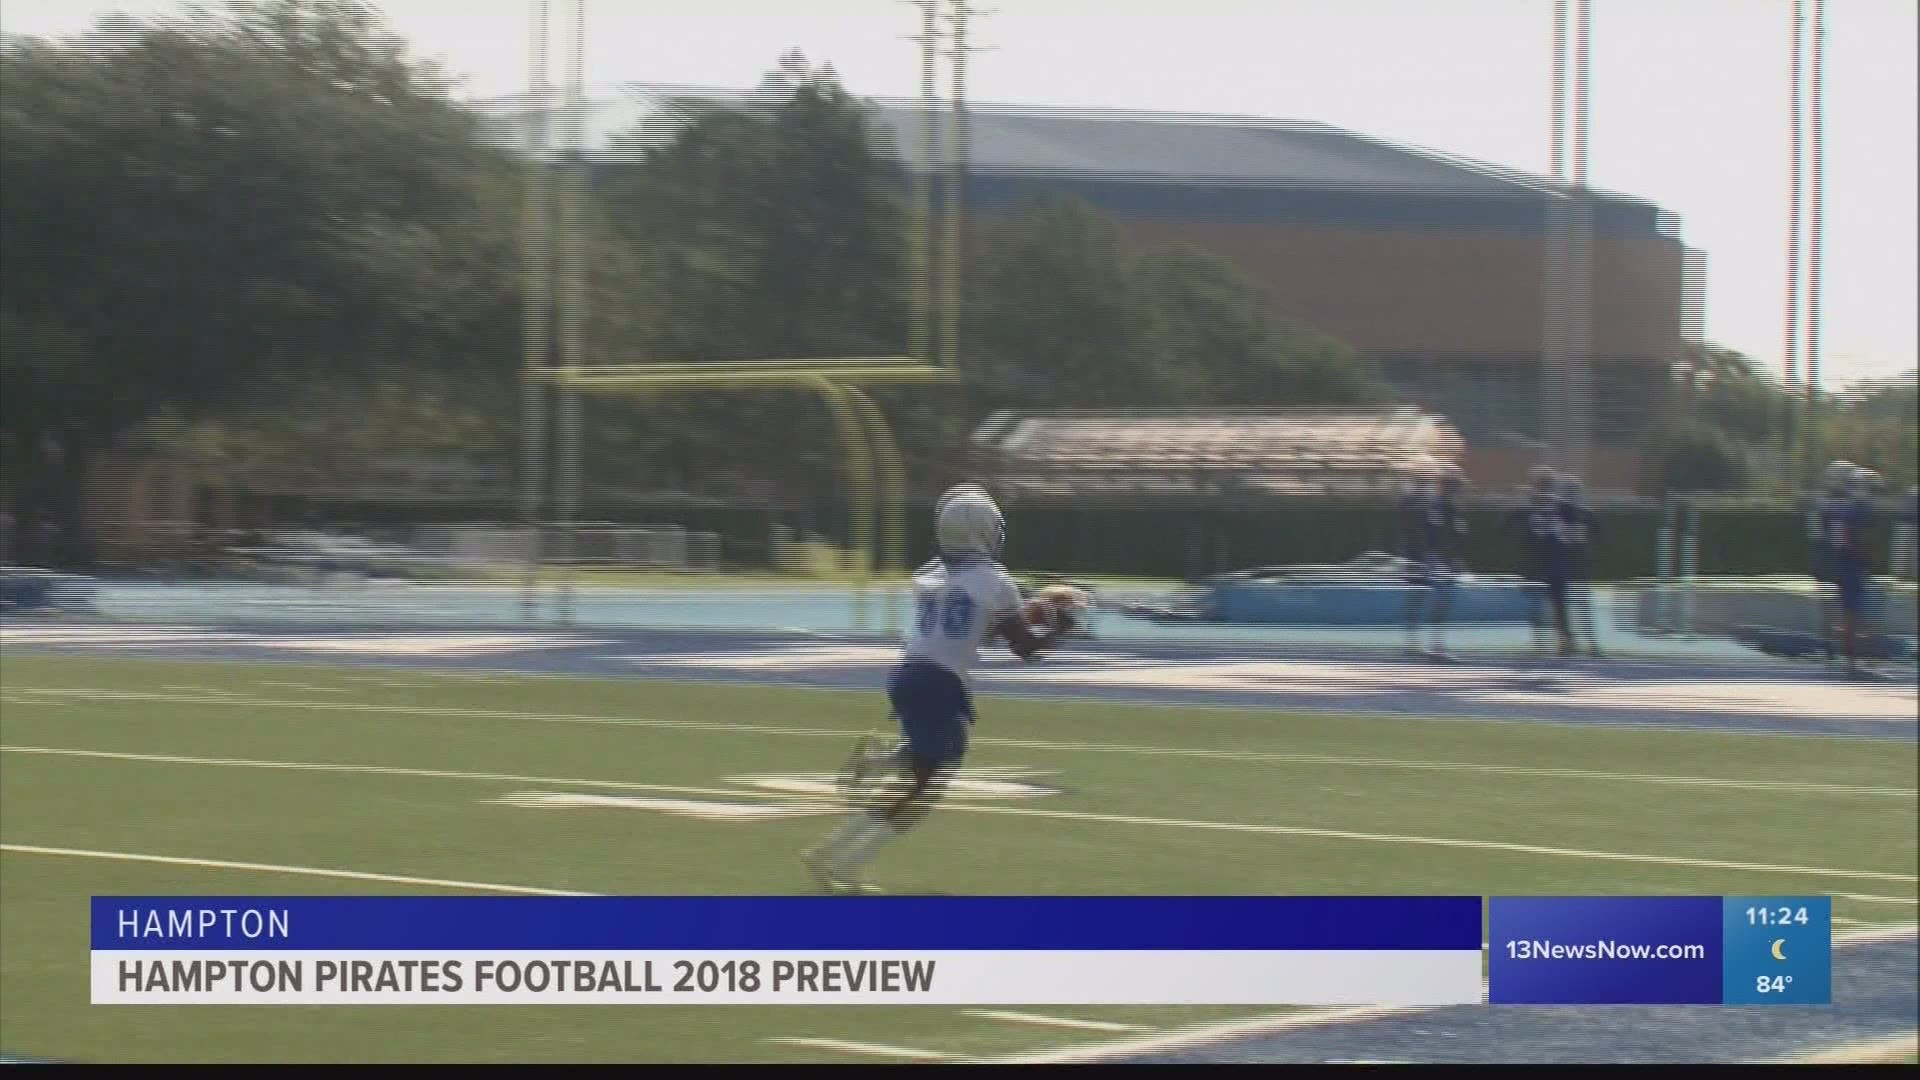 The Hampton Pirates are looking forward to a brand new start under first year head coach, Robert Prunty. They do so as new members of the Big South Conference.